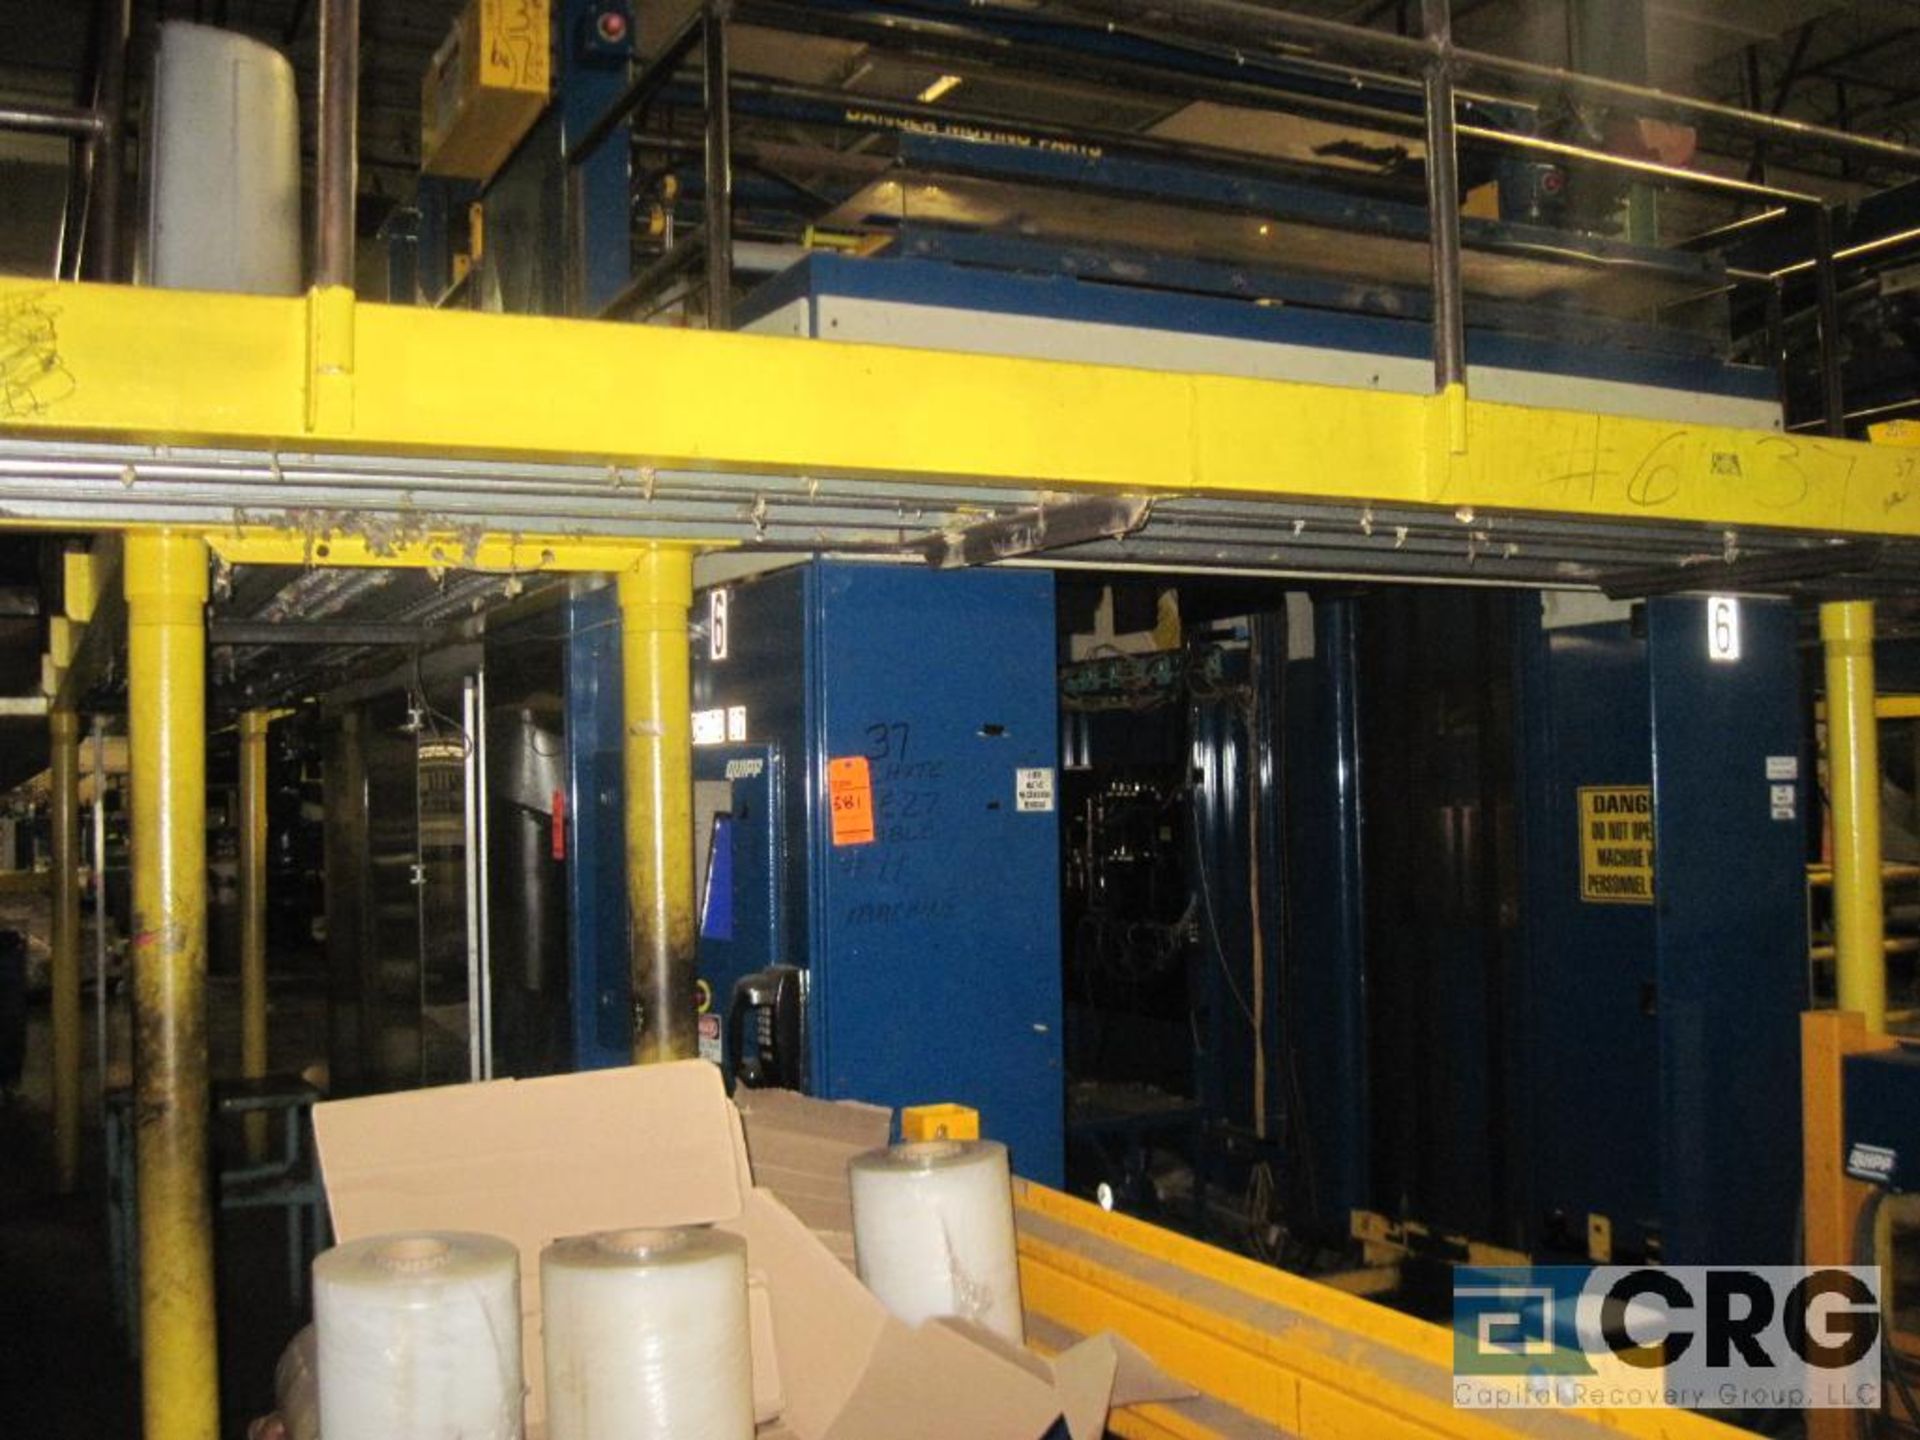 2004 Quipp automatic newspaper palletizer with PLC controls